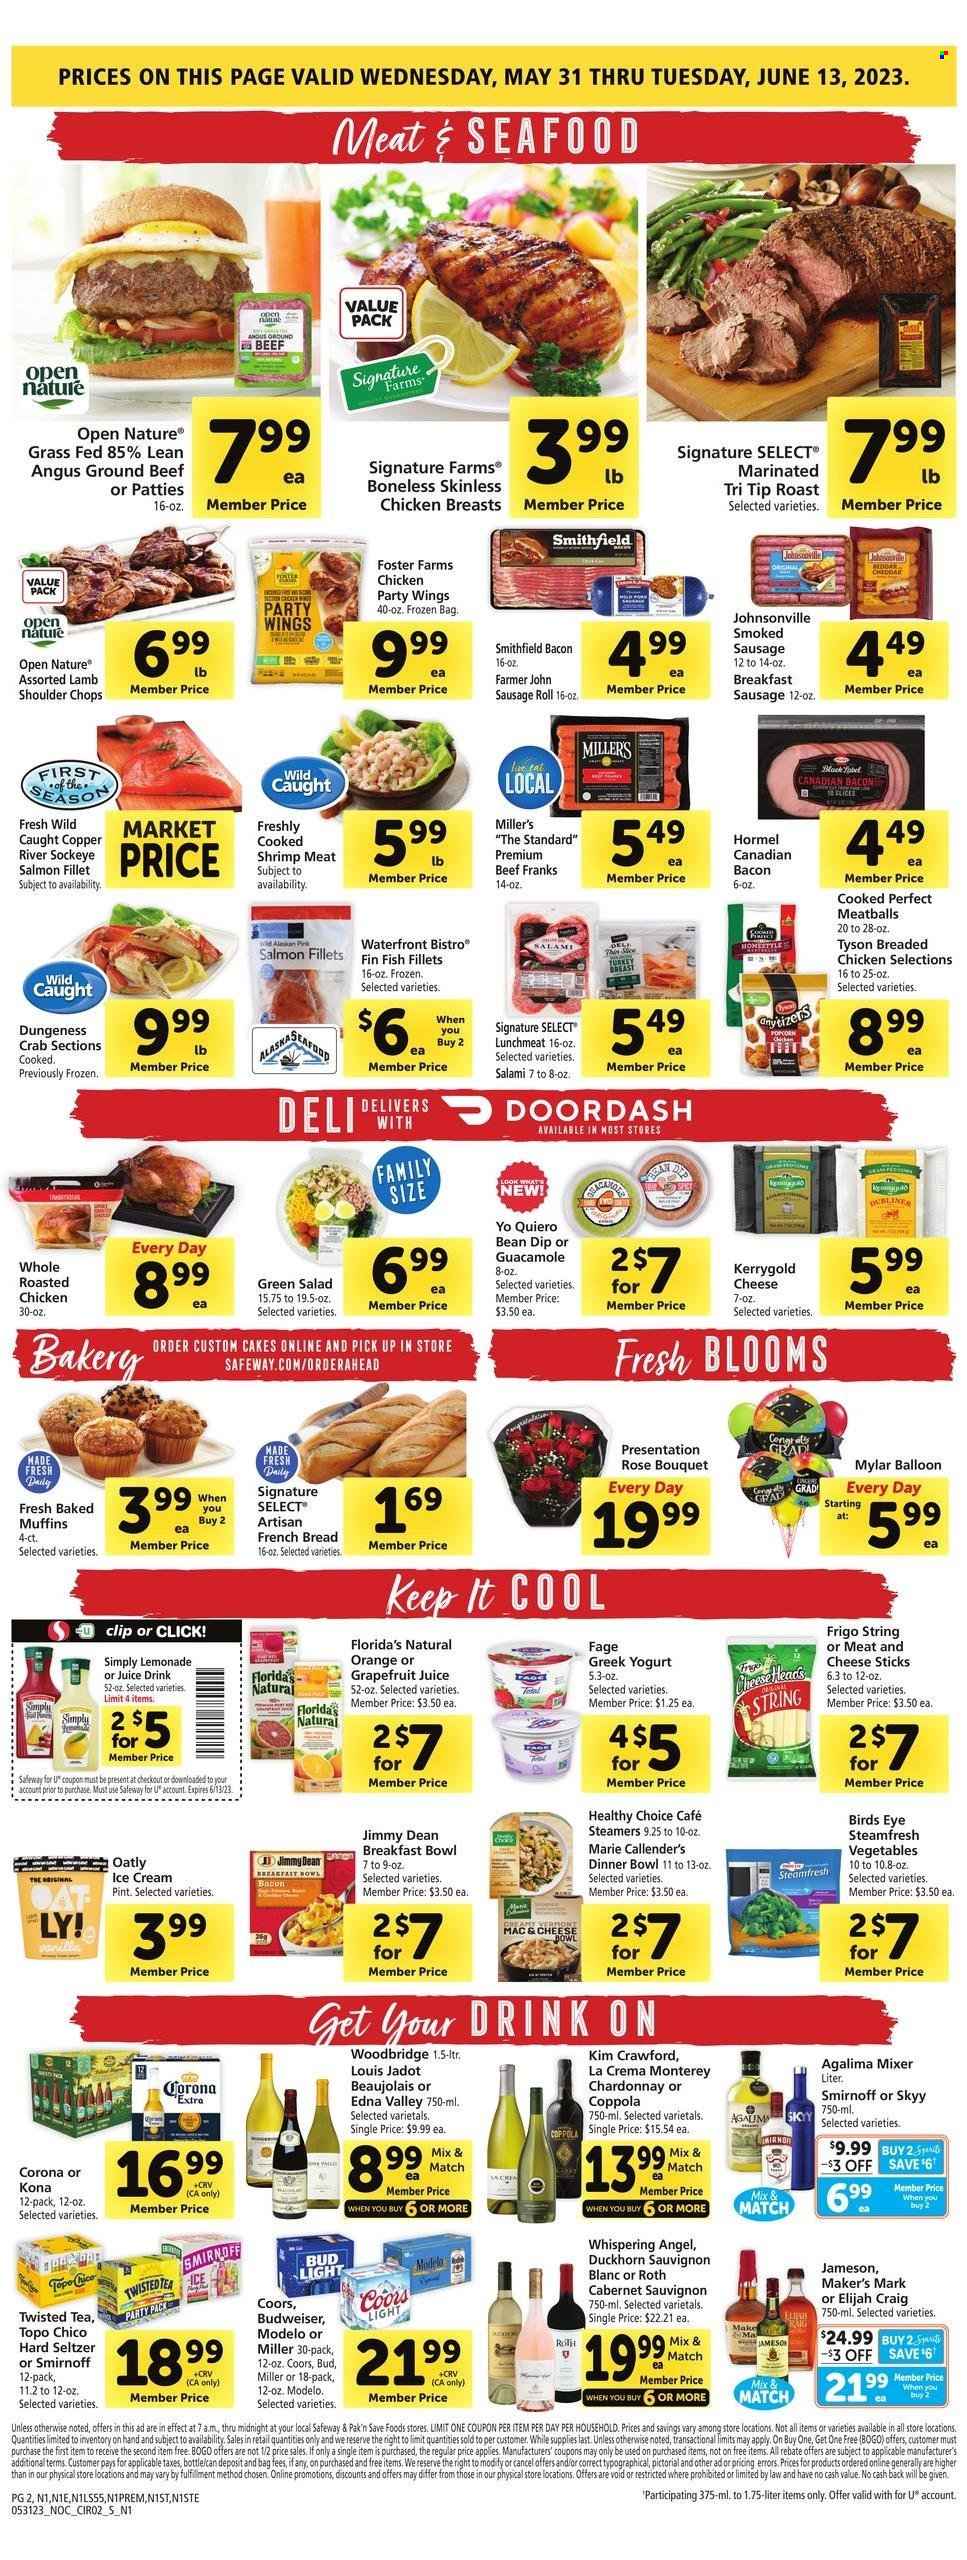 thumbnail - Safeway Flyer - 05/31/2023 - 06/06/2023 - Sales products - bread, sausage rolls, cake, french bread, muffin, oranges, beef meat, ground beef, roast, Johnsonville, lamb meat, lamb shoulder, fish fillets, salmon, salmon fillet, seafood, crab, fish, chicken roast, meatballs, fried chicken, breakfast bowl, Bird's Eye, Healthy Choice, Marie Callender's, Jimmy Dean, Hormel, ready meal, bacon, canadian bacon, salami, smoked sausage, frankfurters, lunch meat, greek yoghurt, dip, ice cream, cheese sticks, Florida's Natural, guacamole, lemonade, juice, ice tea, Cabernet Sauvignon, red wine, white wine, Chardonnay, wine, Woodbridge, Kim Crawford, Smirnoff, whiskey, Jameson, SKYY, Hard Seltzer, beer, Bud Light, Corona Extra, Modelo, Topo Chico, pin, balloons, bouquet, rose, Budweiser, Coors, Twisted Tea. Page 4.